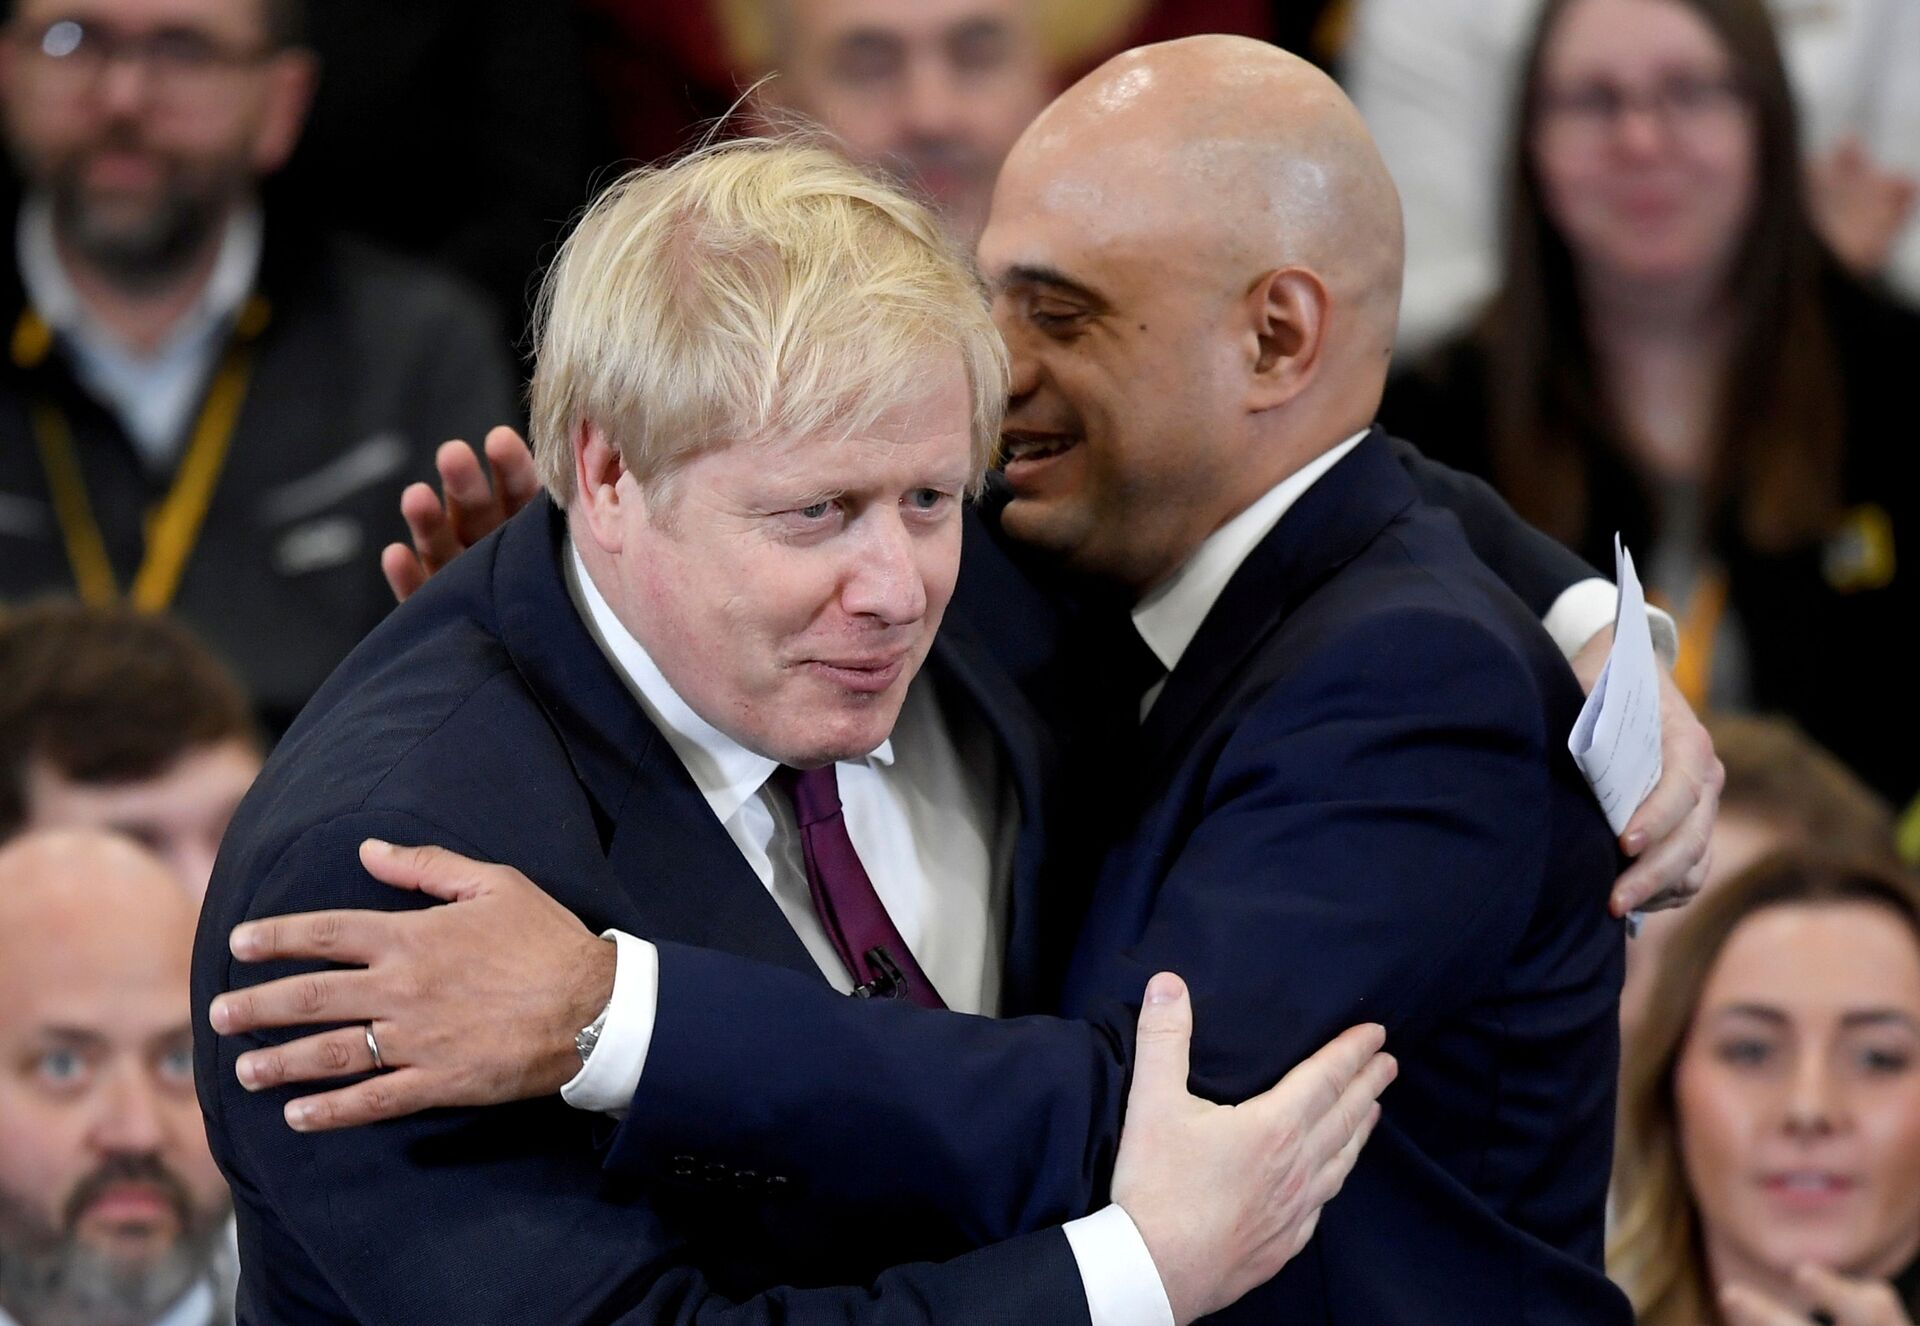 Britain's Prime Minister Boris Johnson is embraced by Britain's Chancellor of the Exchequer Sajid Javid before speaking to the workers as he visits a JCB factory during his general election campaign in Uttoxeter, Britain, December 10, 2019 - Sputnik International, 1920, 08.09.2021